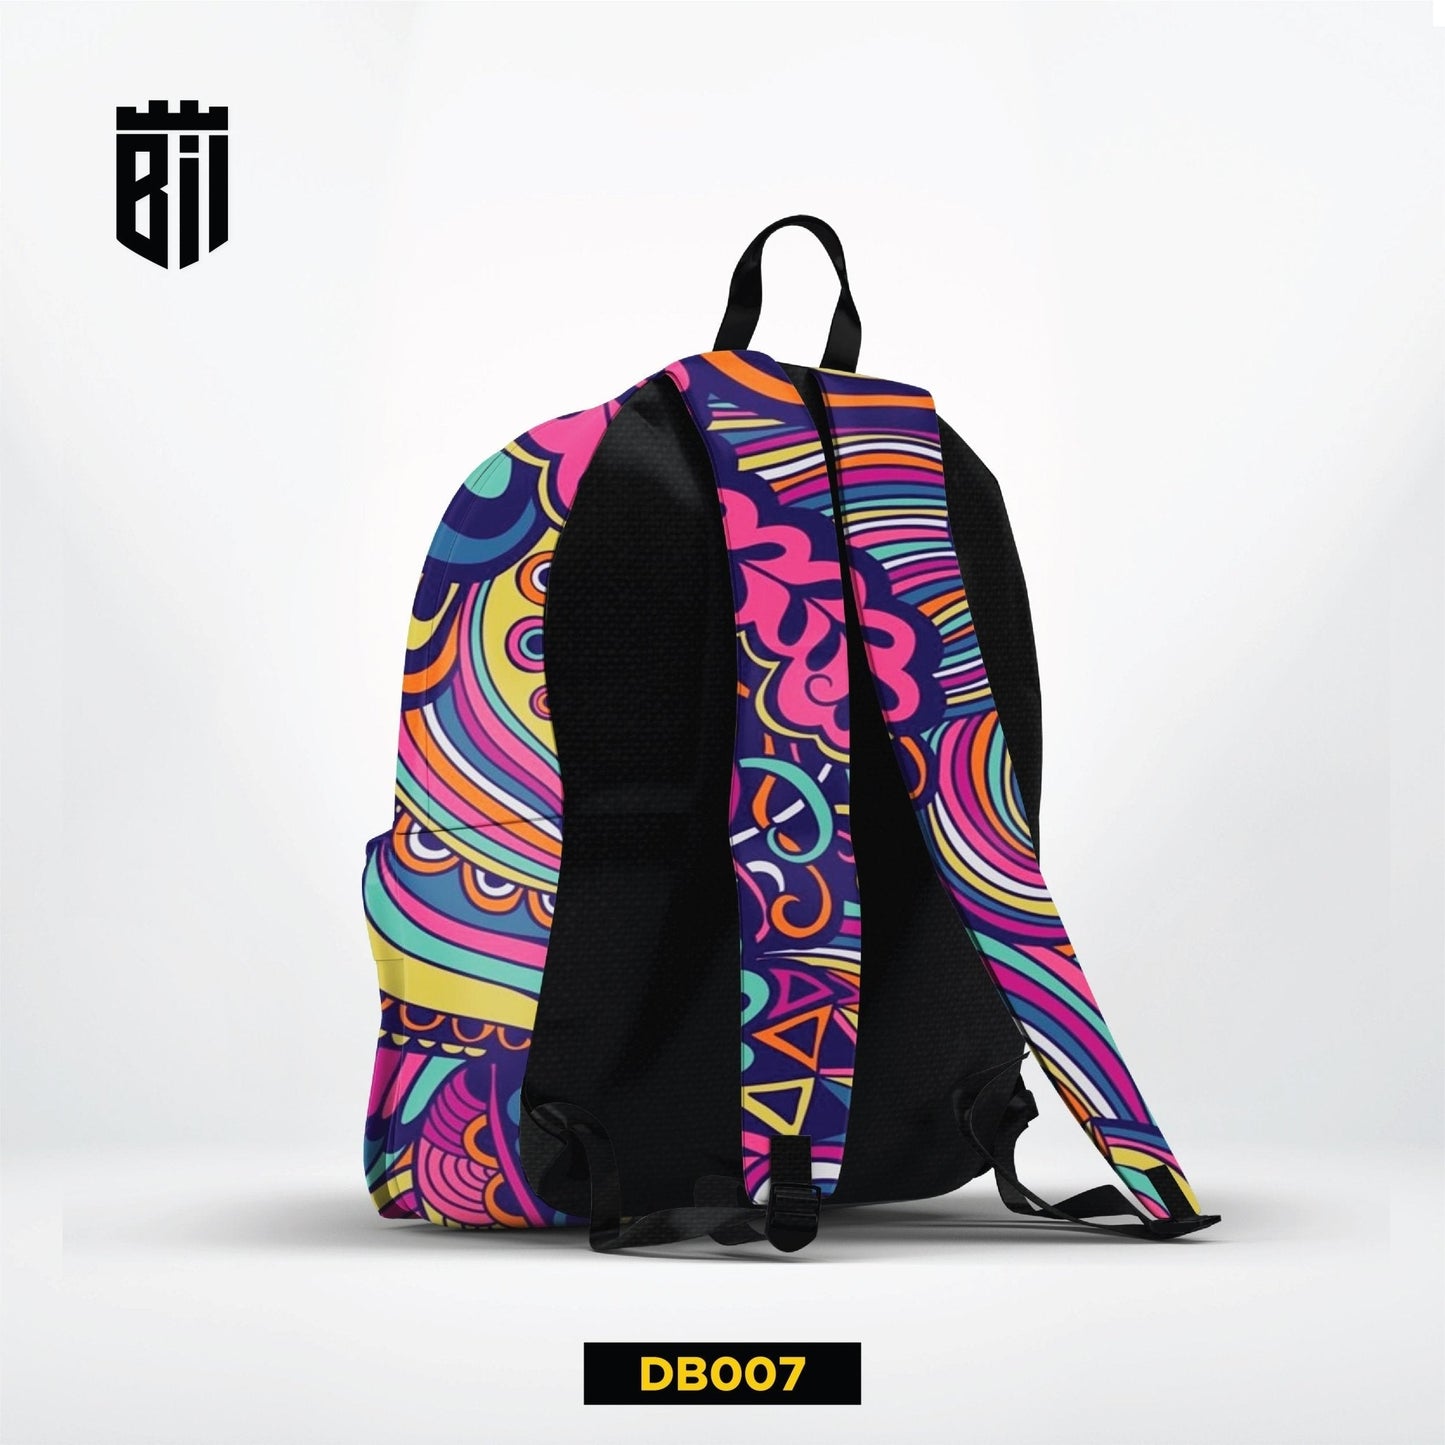 DB007 Colorful Pattern Allover Printed Backpack - BREACHIT